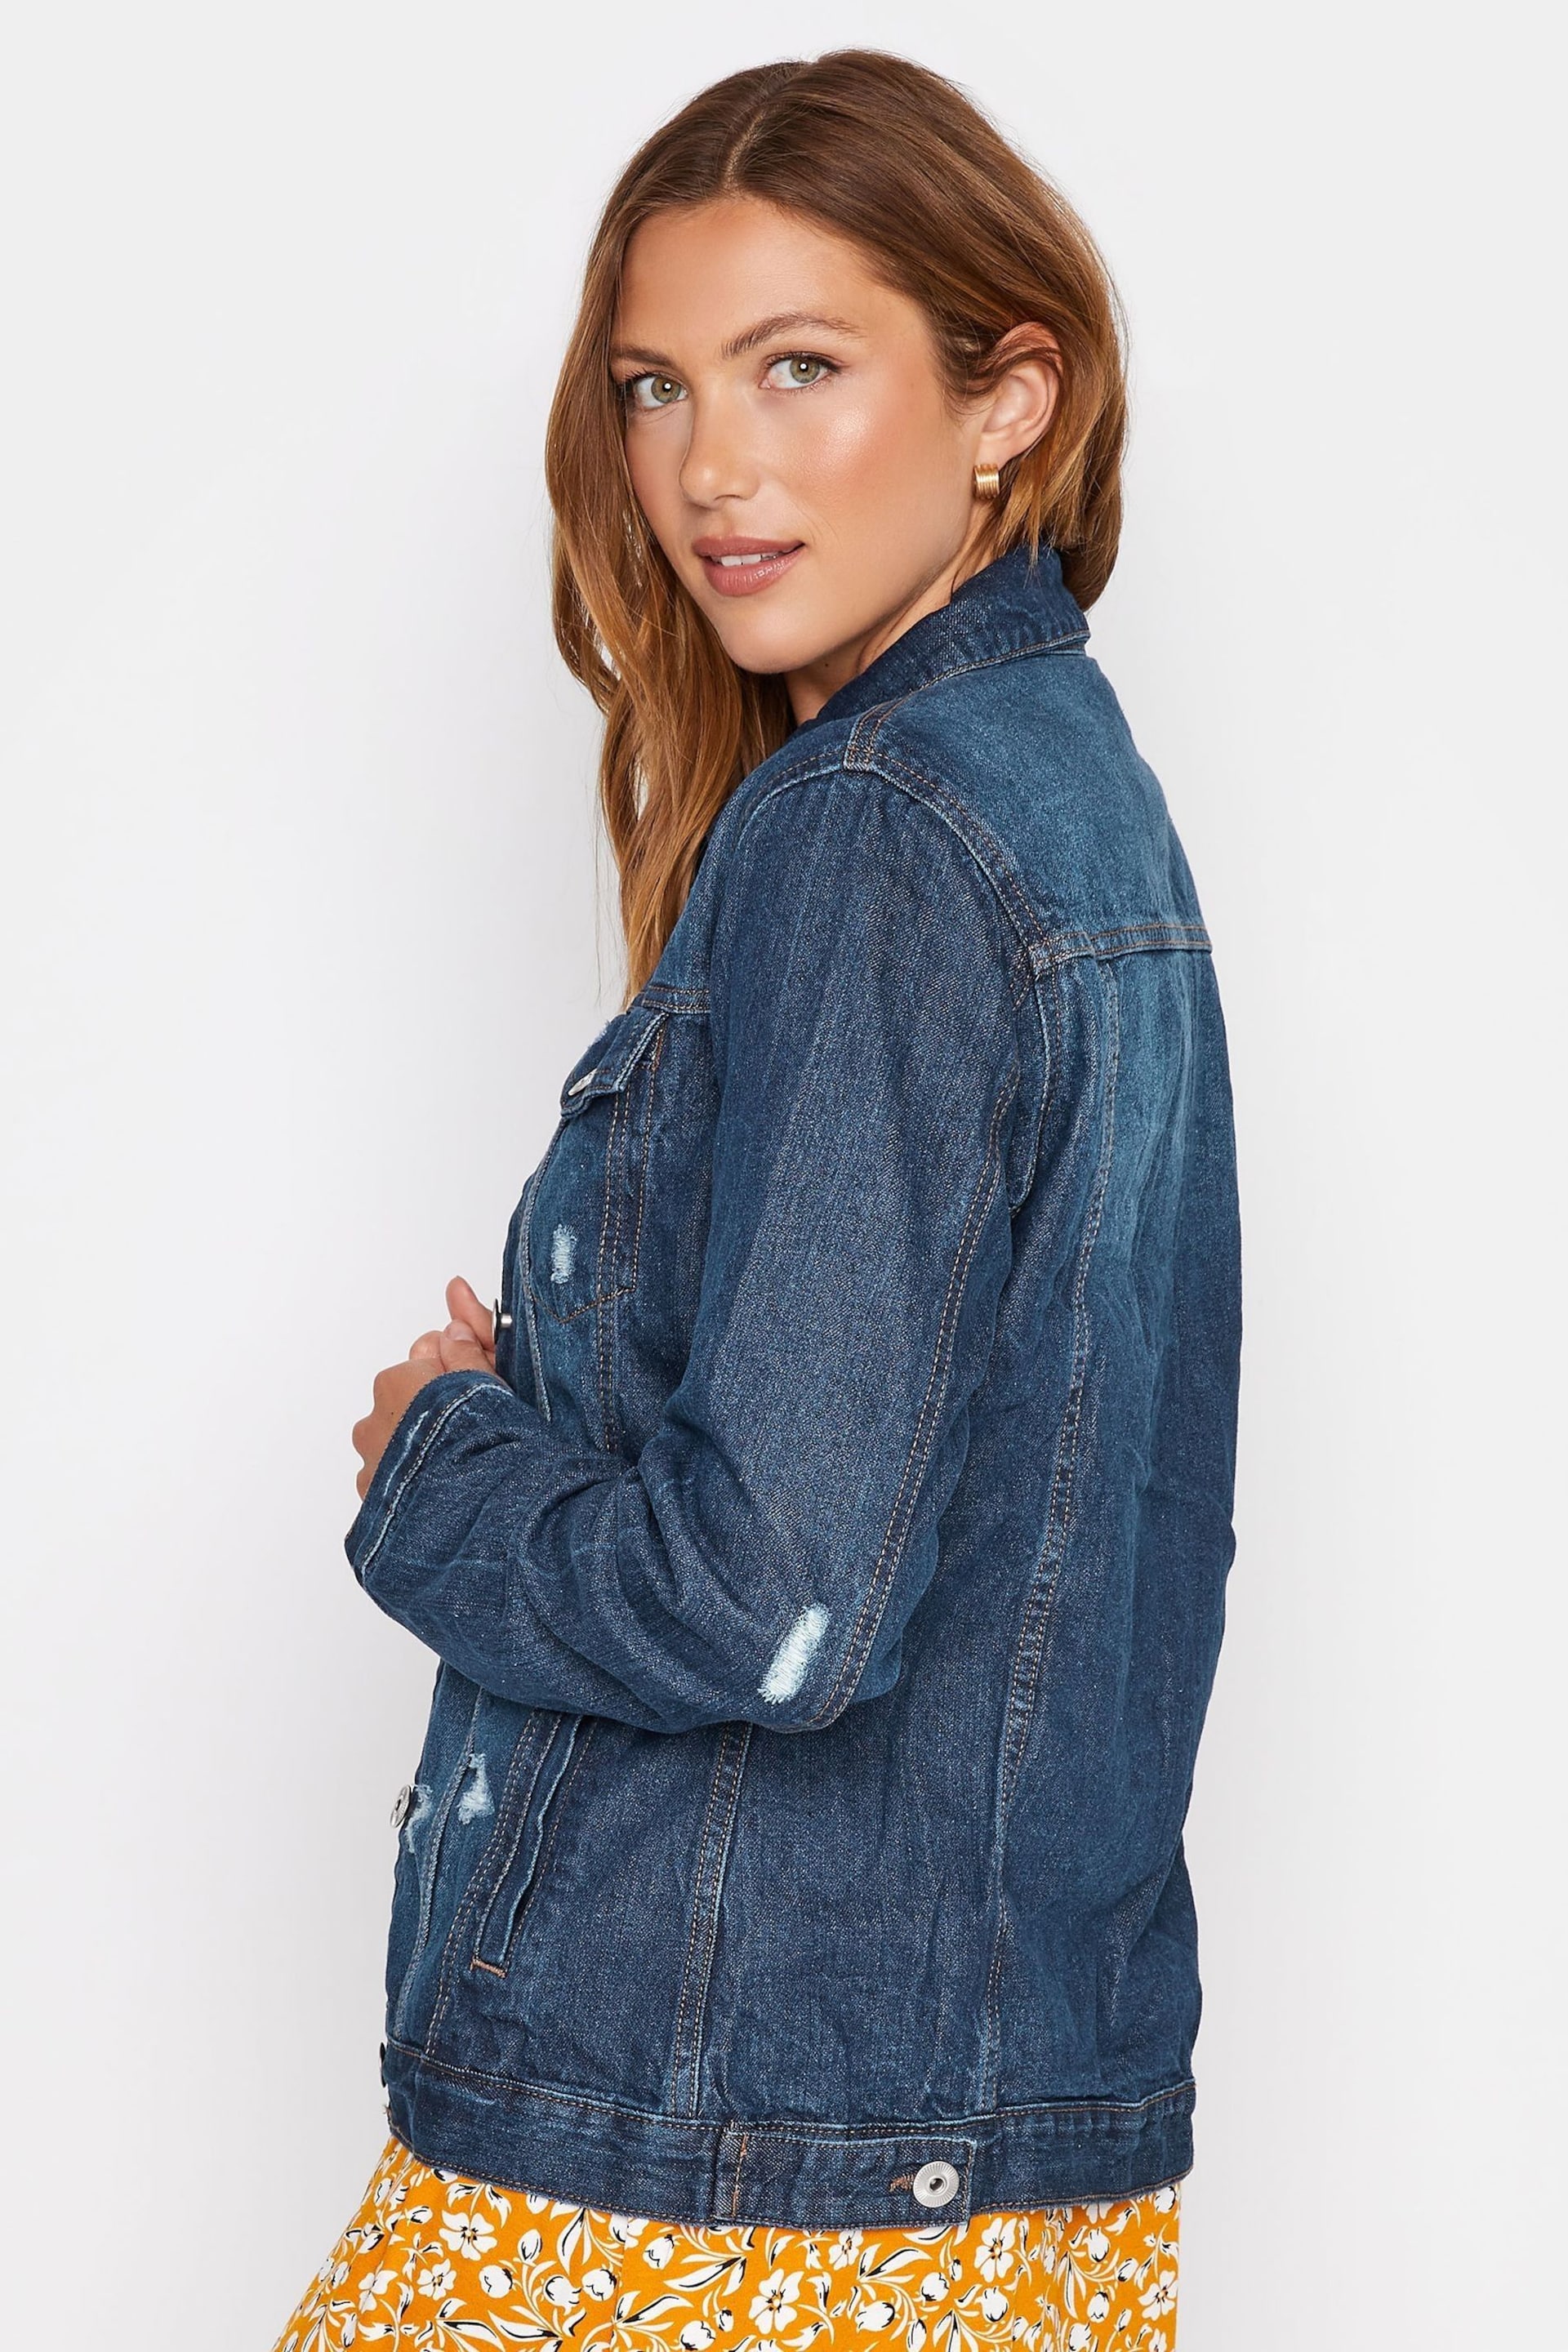 Long Tall Sally Blue Distressed Denim Jacket - Image 2 of 4